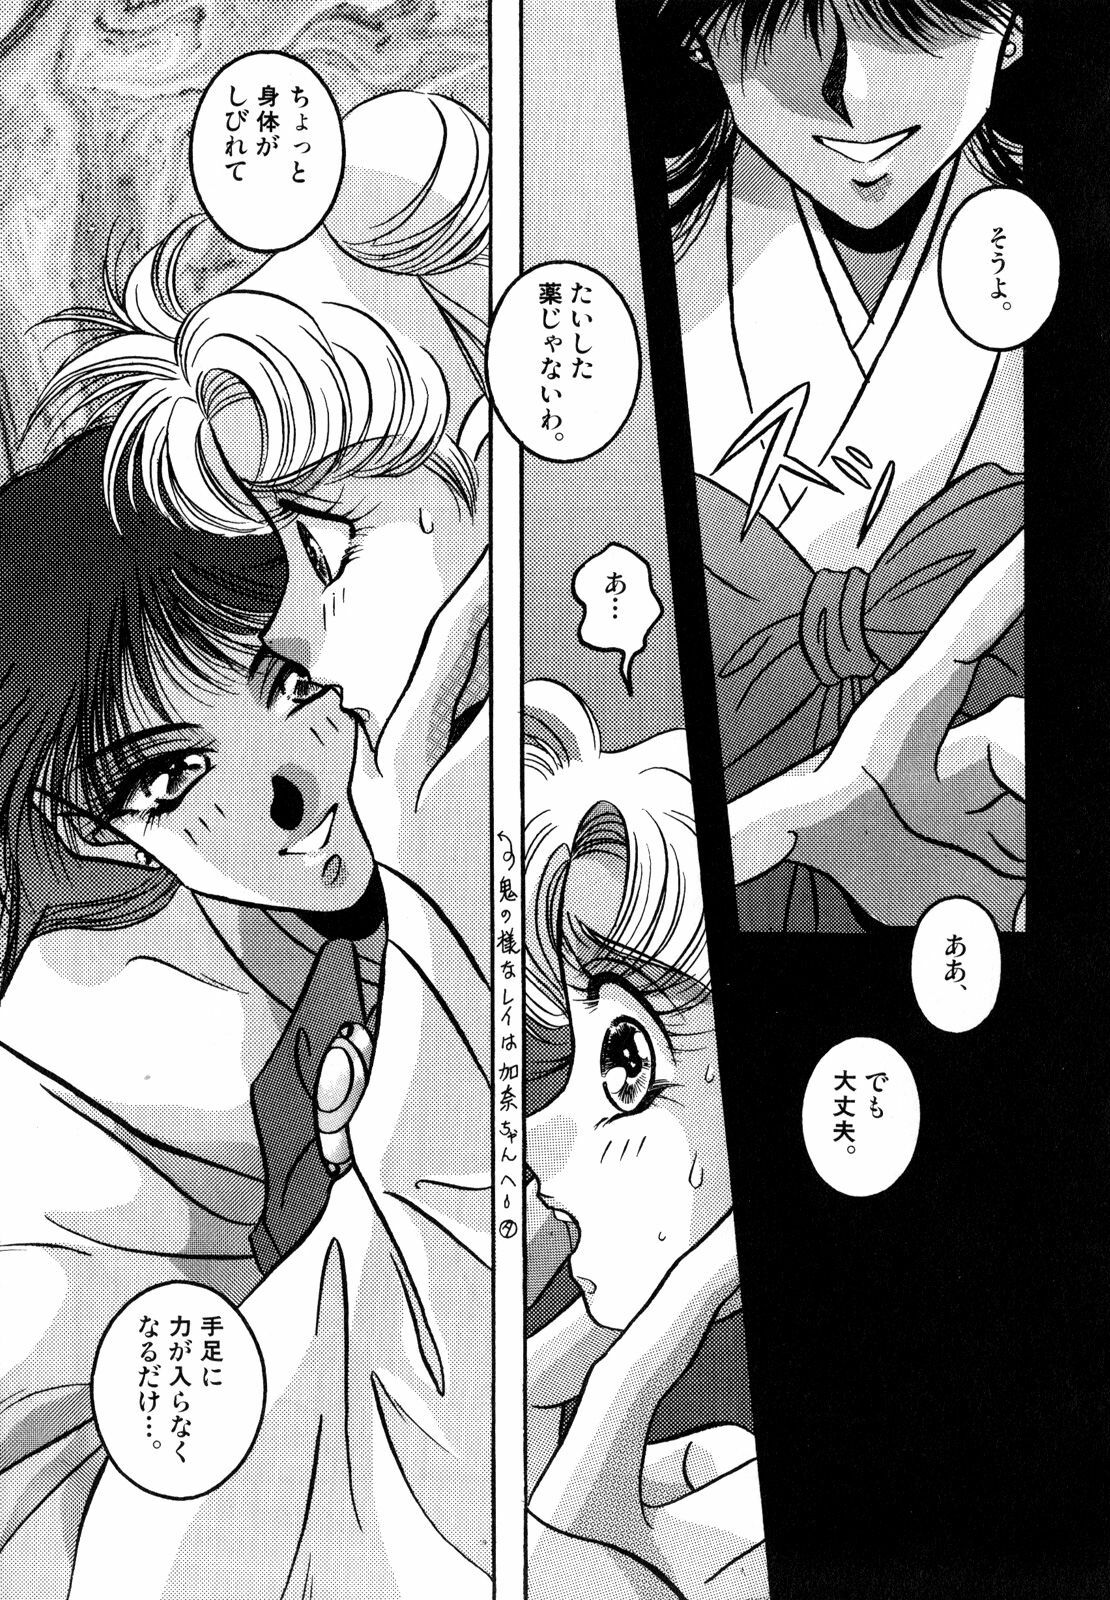 [Anthology] Lunatic Party 2 (Sailor Moon) page 30 full